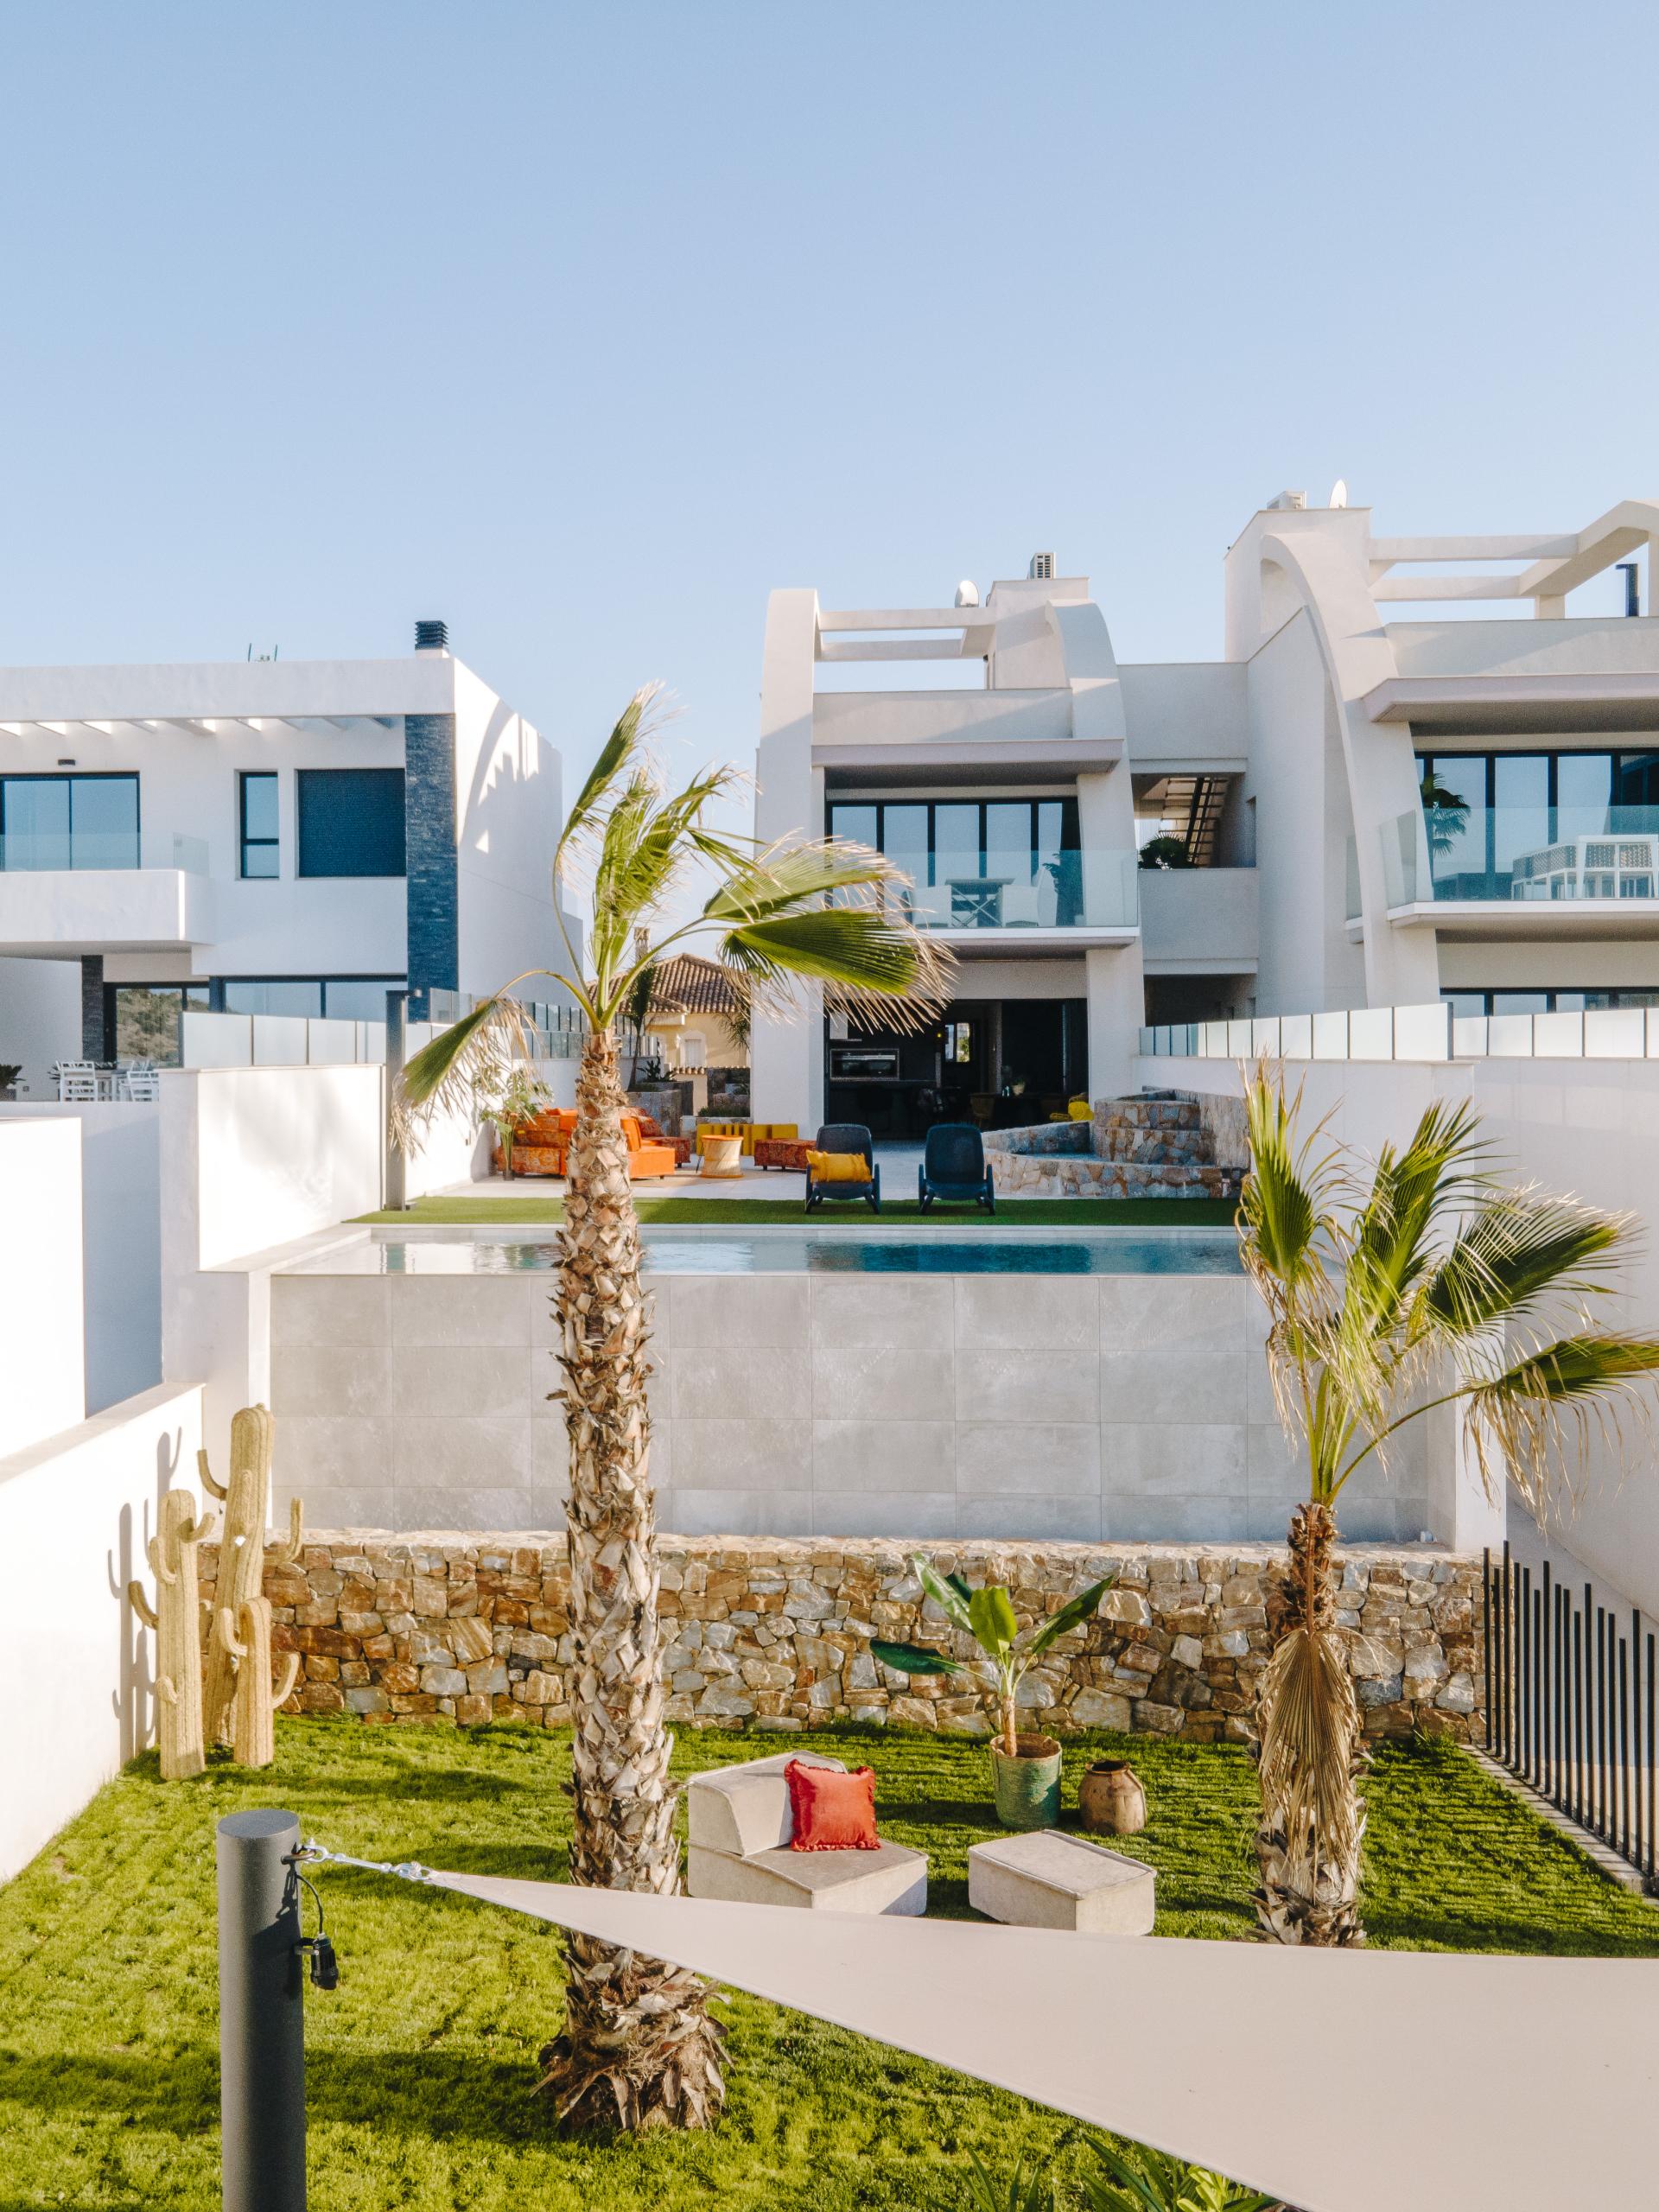 Ground floor apartment with private pool in Rojales, Alicante (Costa Blanca) in Medvilla Spanje